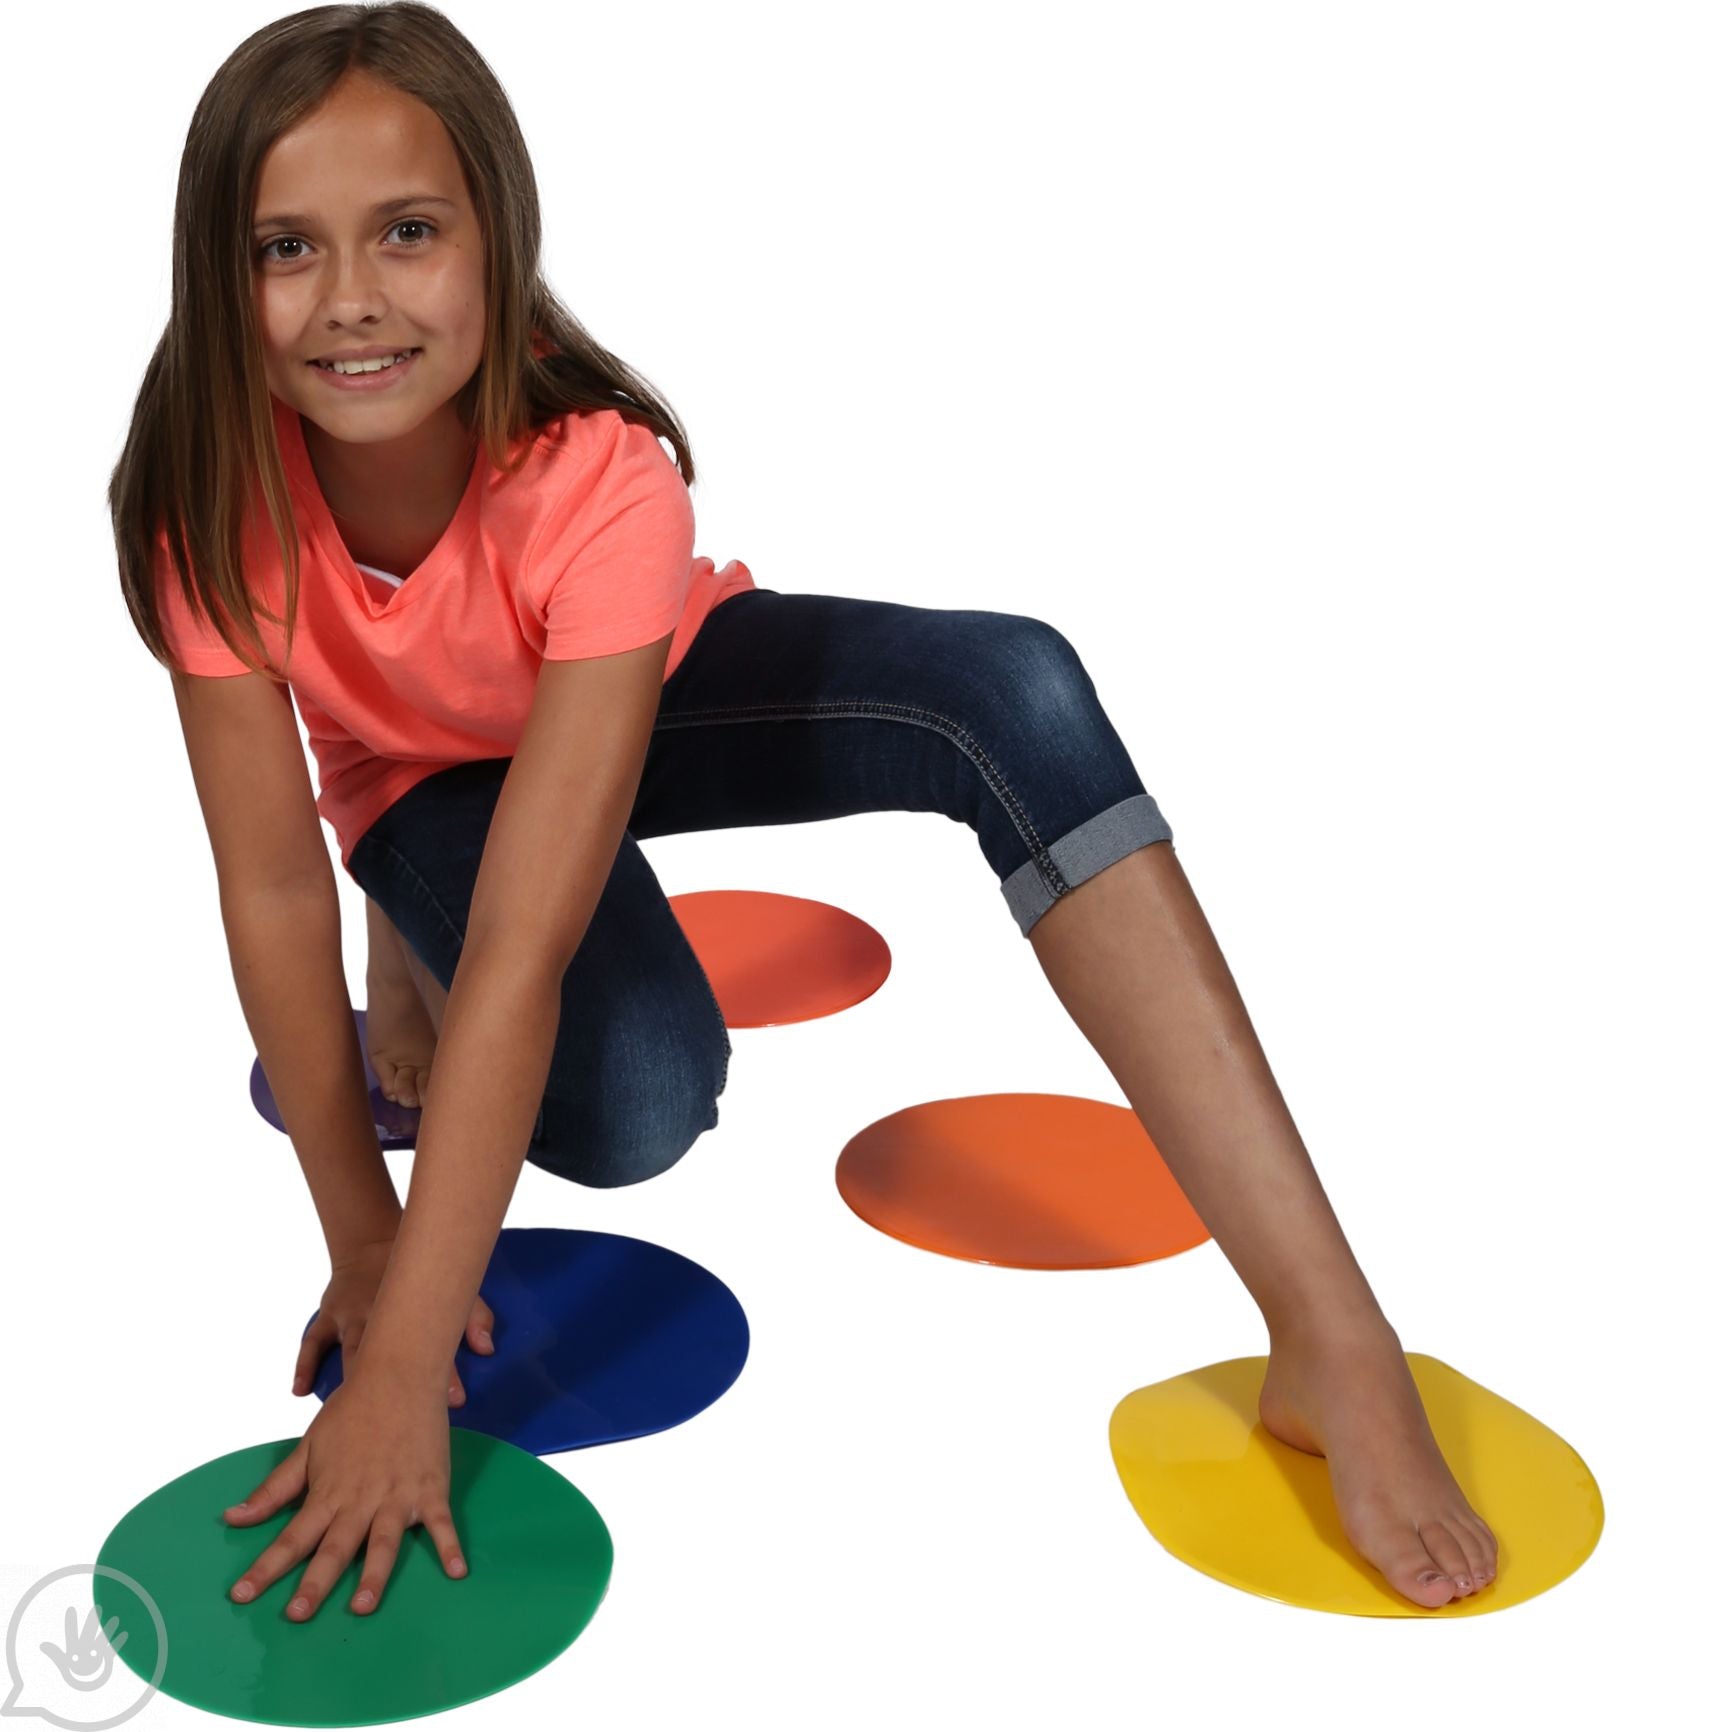 A child with medium light skin tone and shoulder length brown hair is positions above the Spot Markers. Their feet and hands are spread across different colored markers and they are smiling.